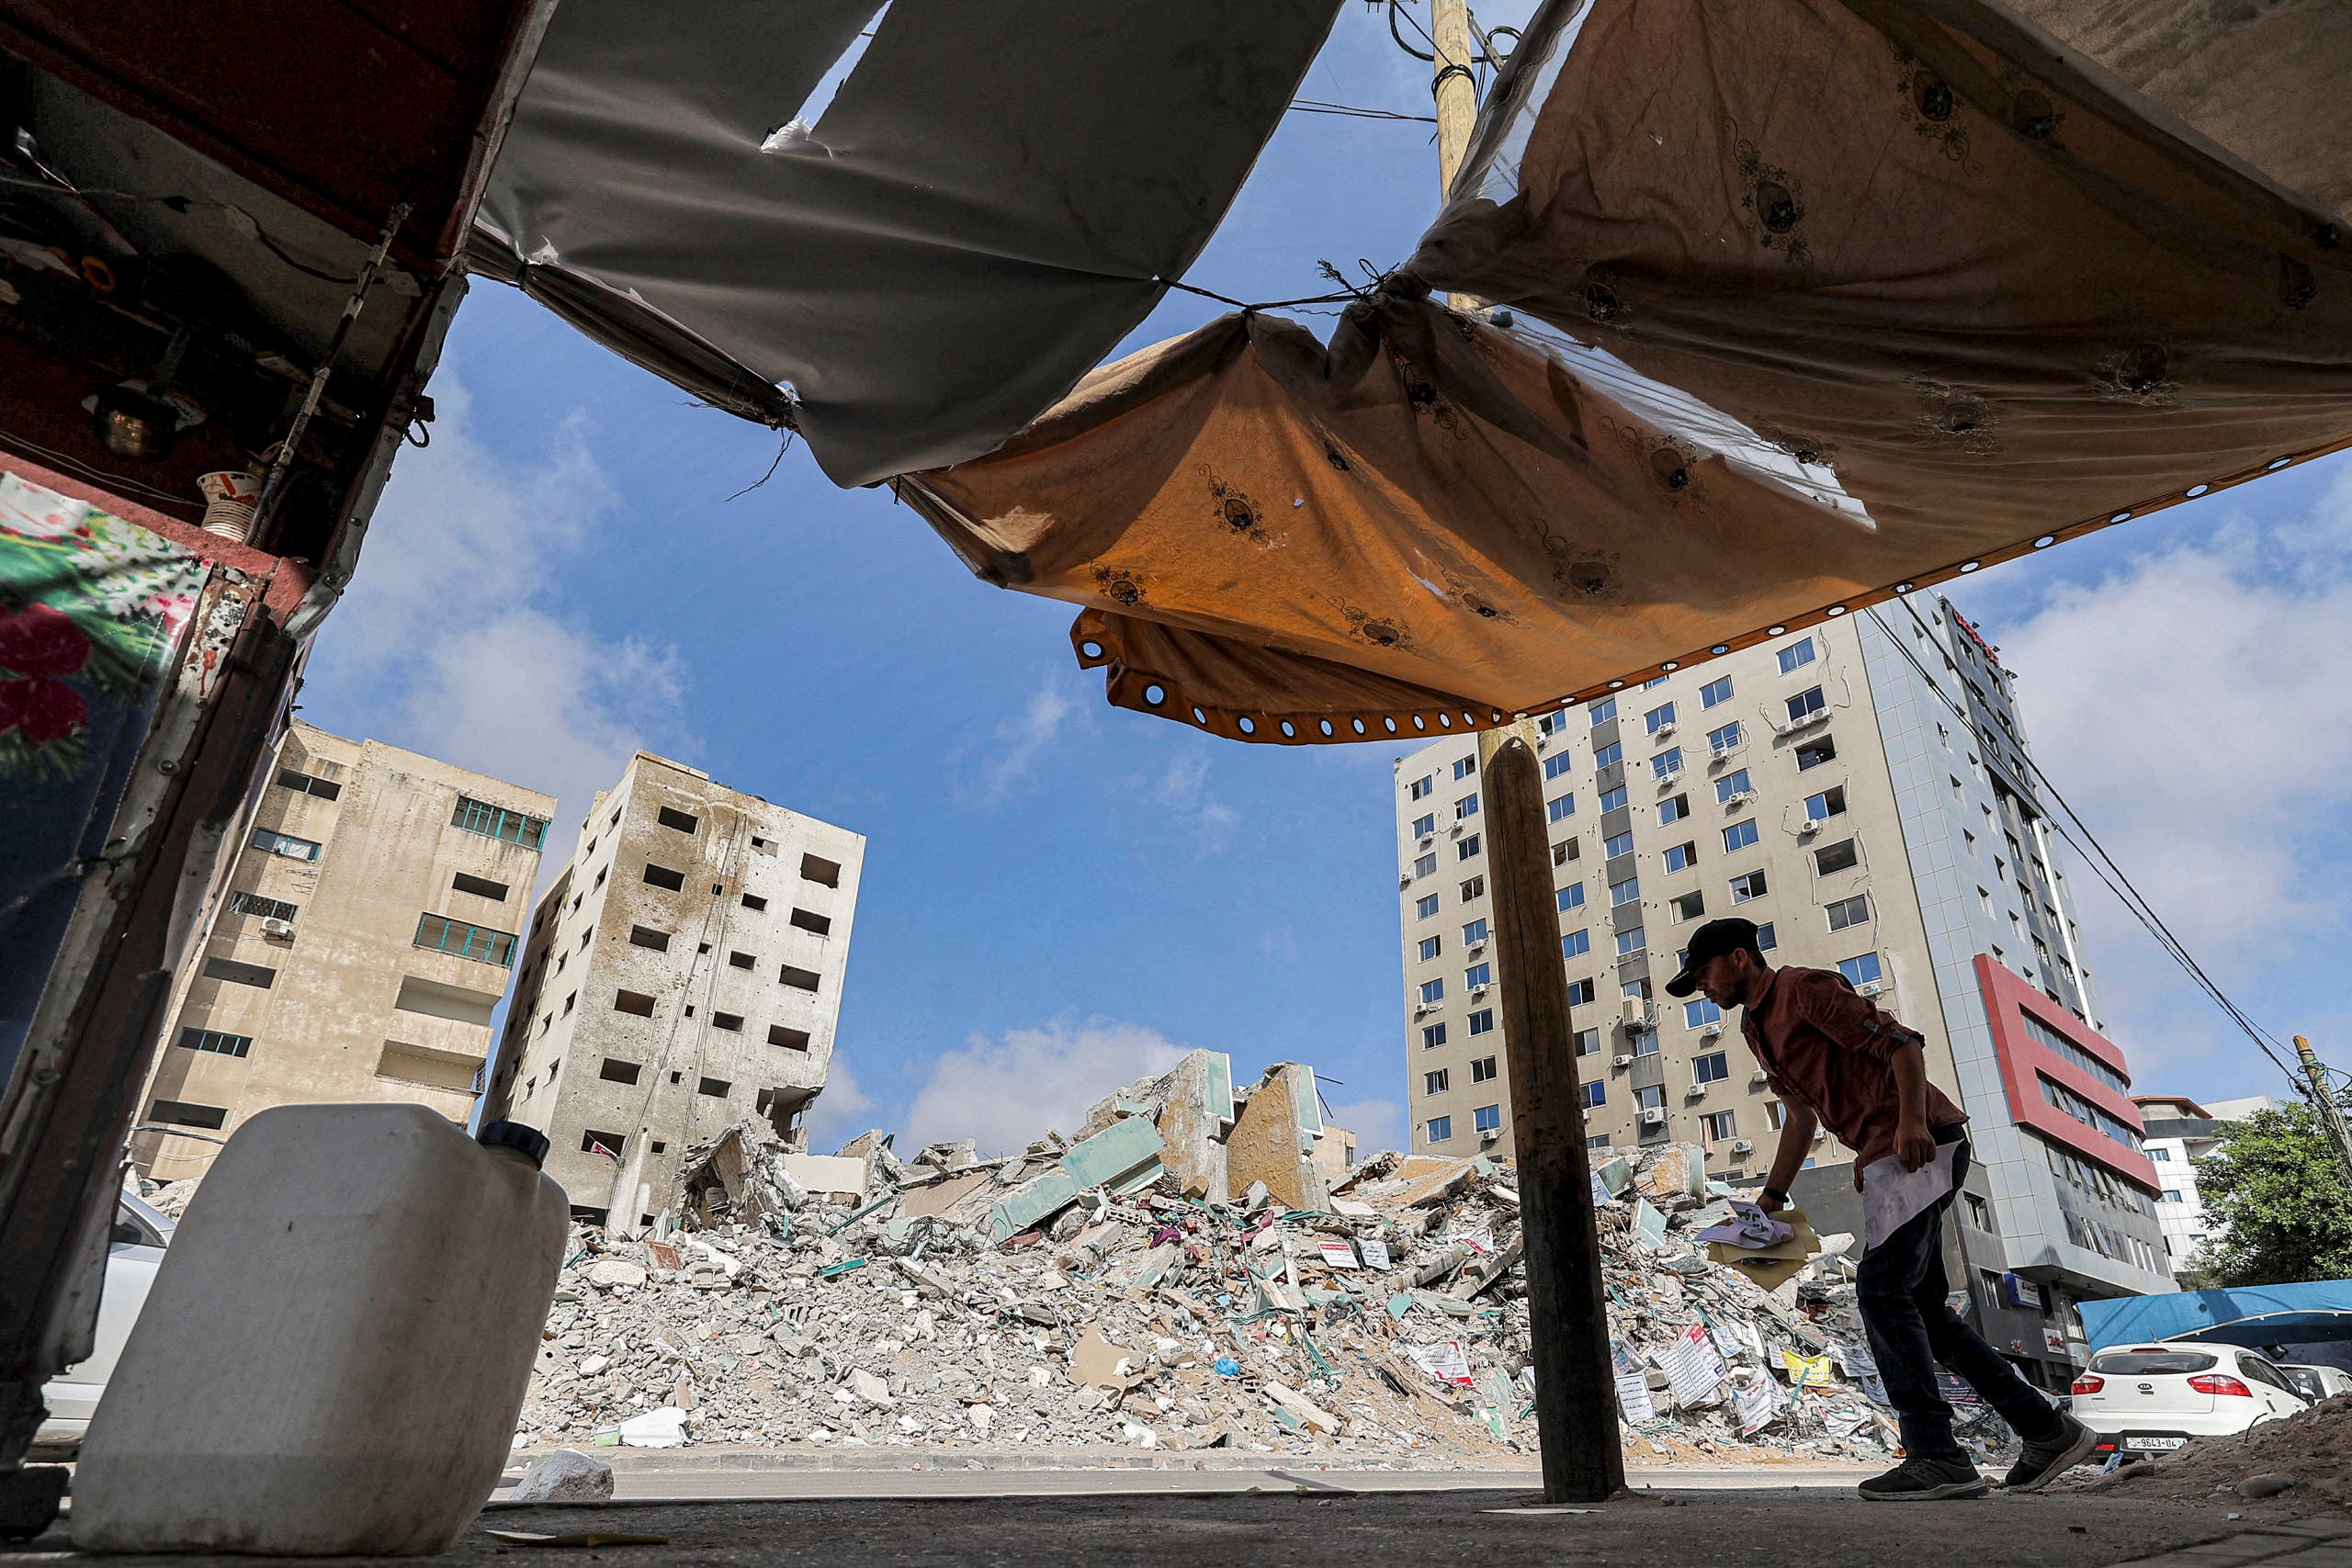 A Palestinian holding fragments of papers walks past the rubble of a building destroyed during the May 2021 conflict between Hamas and Israel in Gaza City's al-Rimal neighbourhood, on June 10, 2021. (AFP)